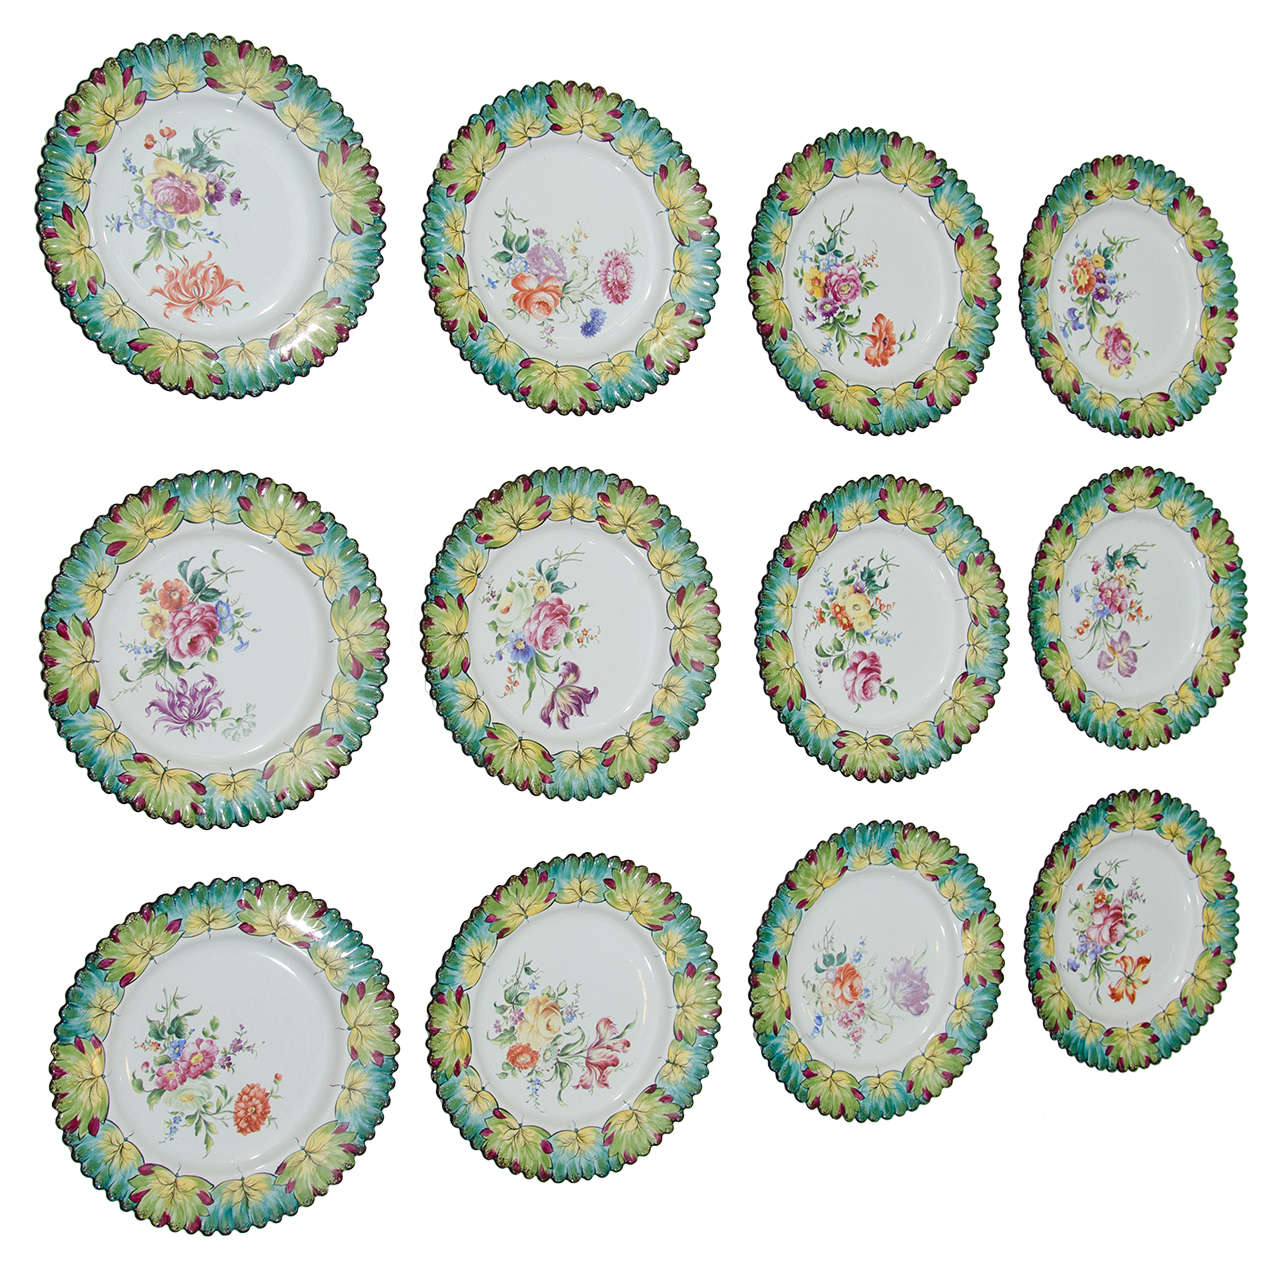 Vintage Set of Twelve Hand-Painted Tiffany & Co. Plates by Camille Le Tallec